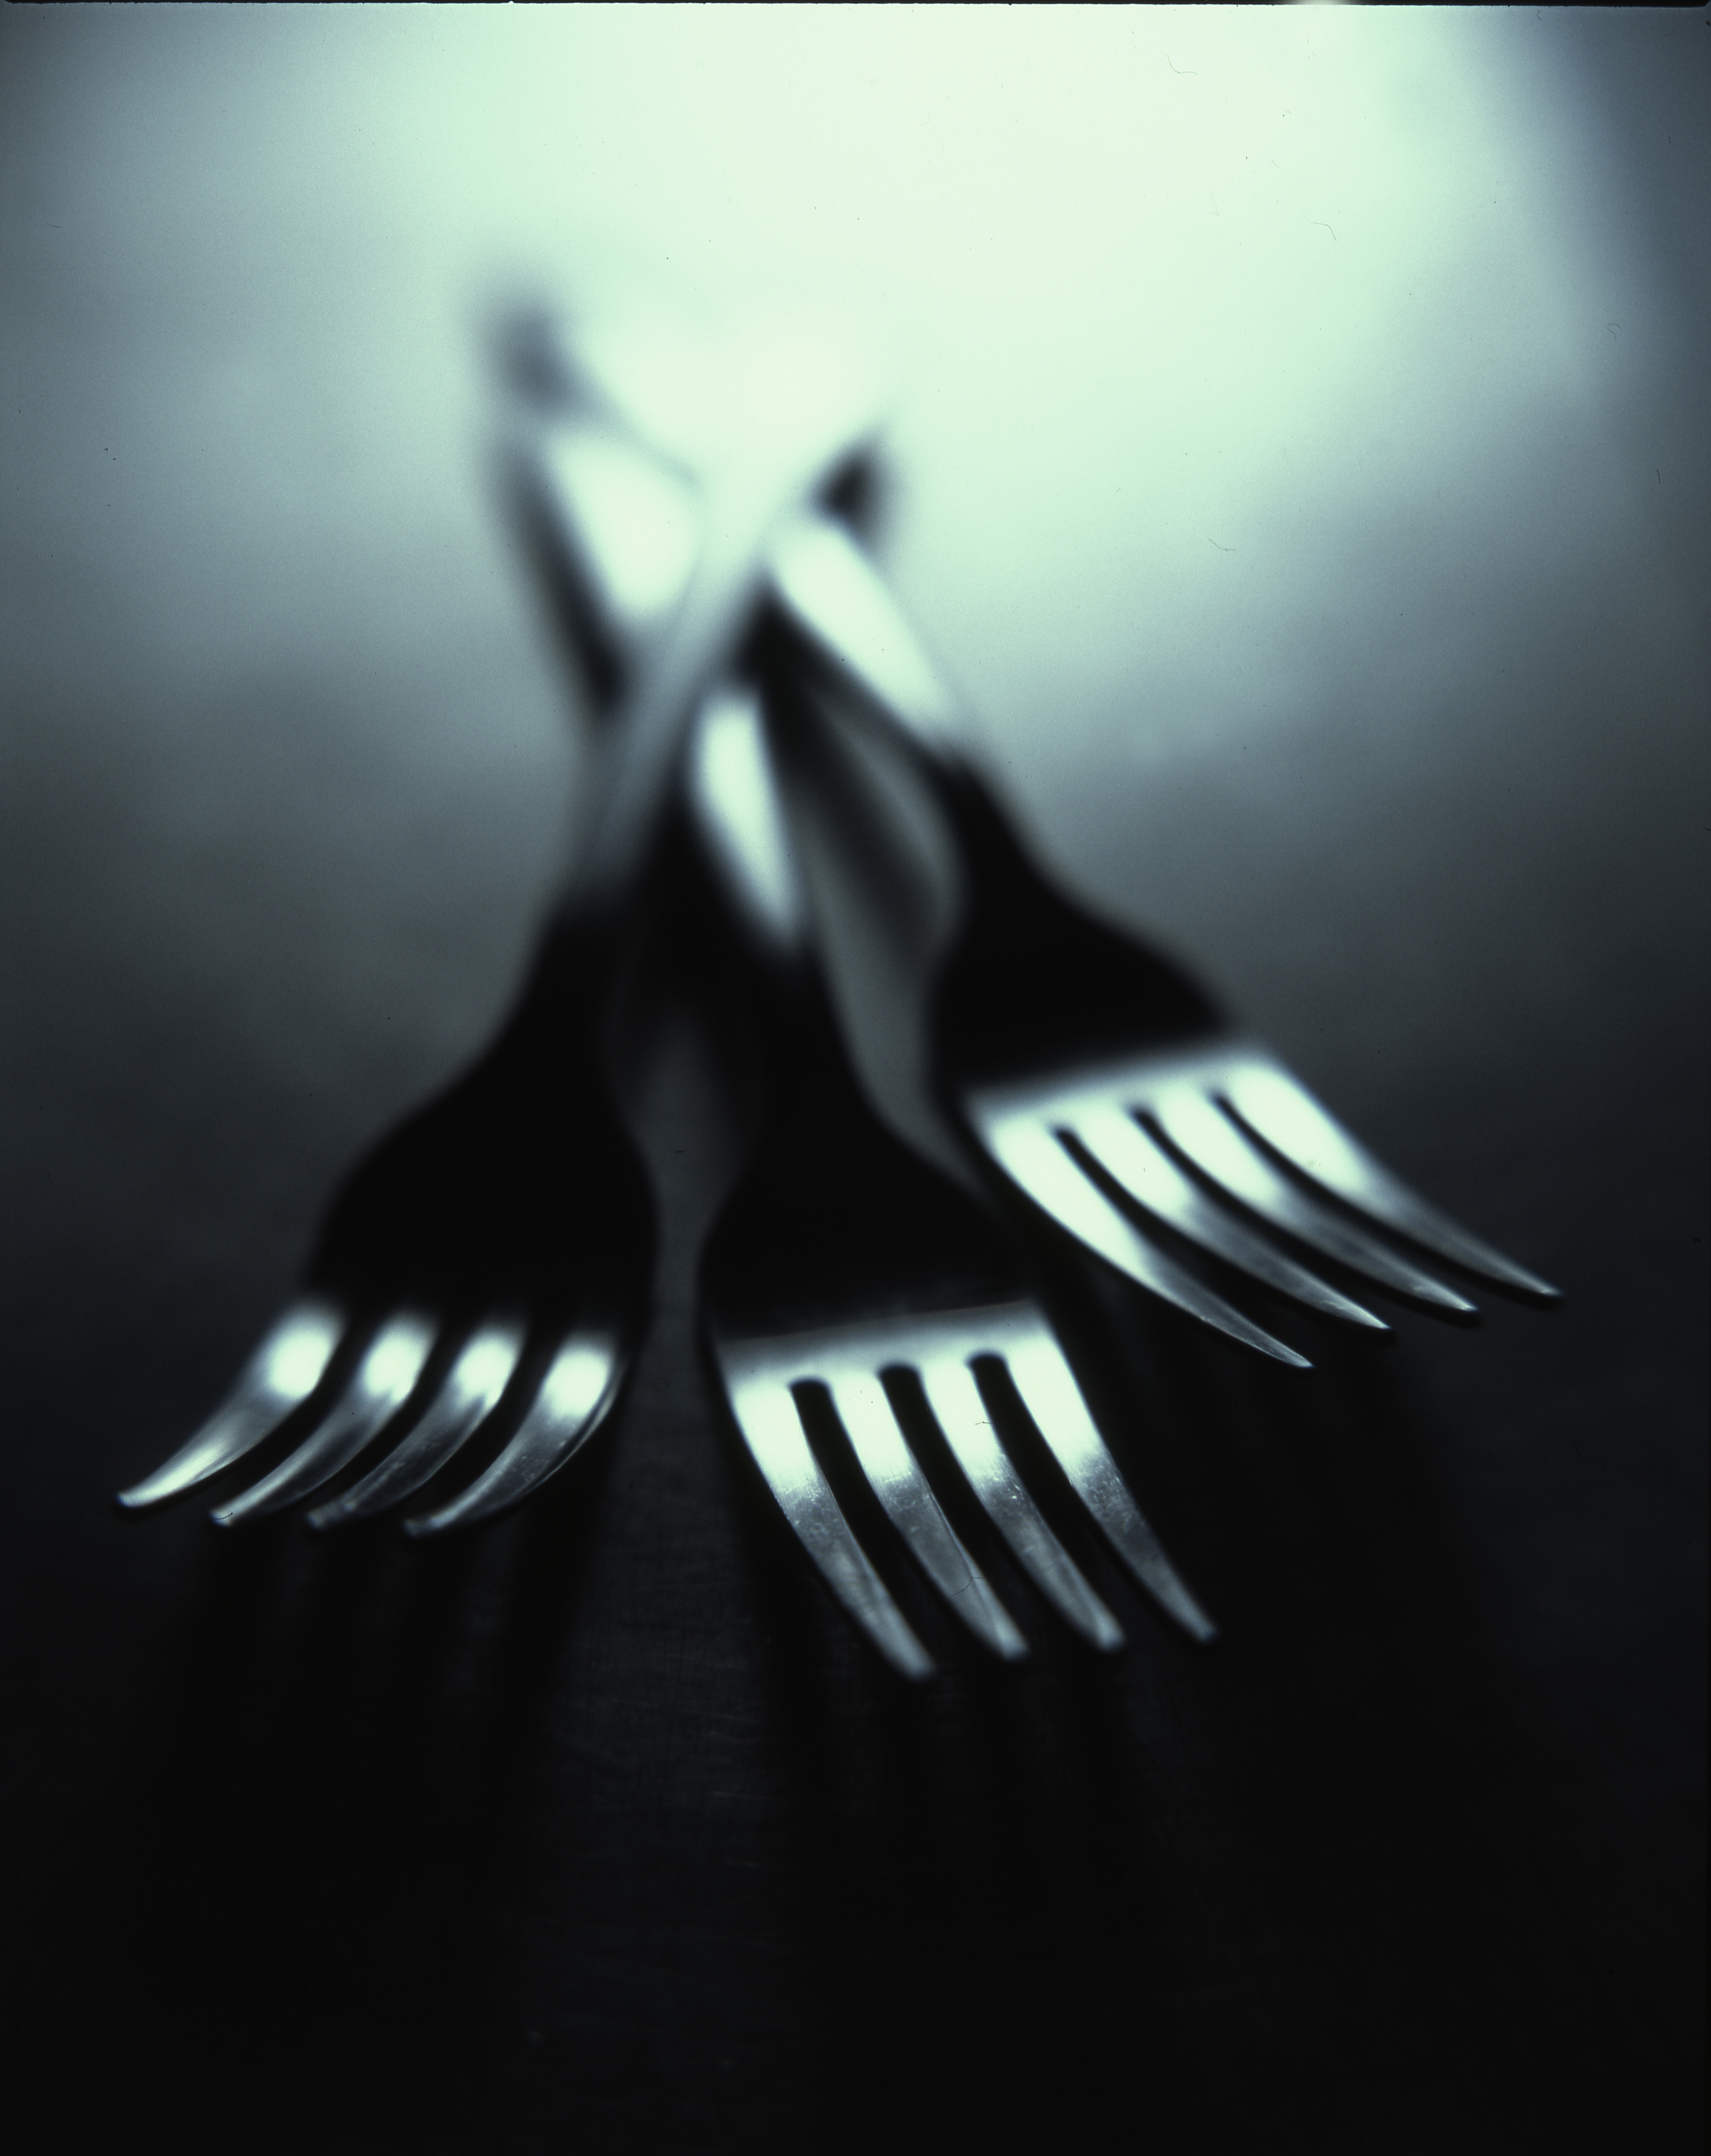 Forks that represent fat laced foods and weight loss